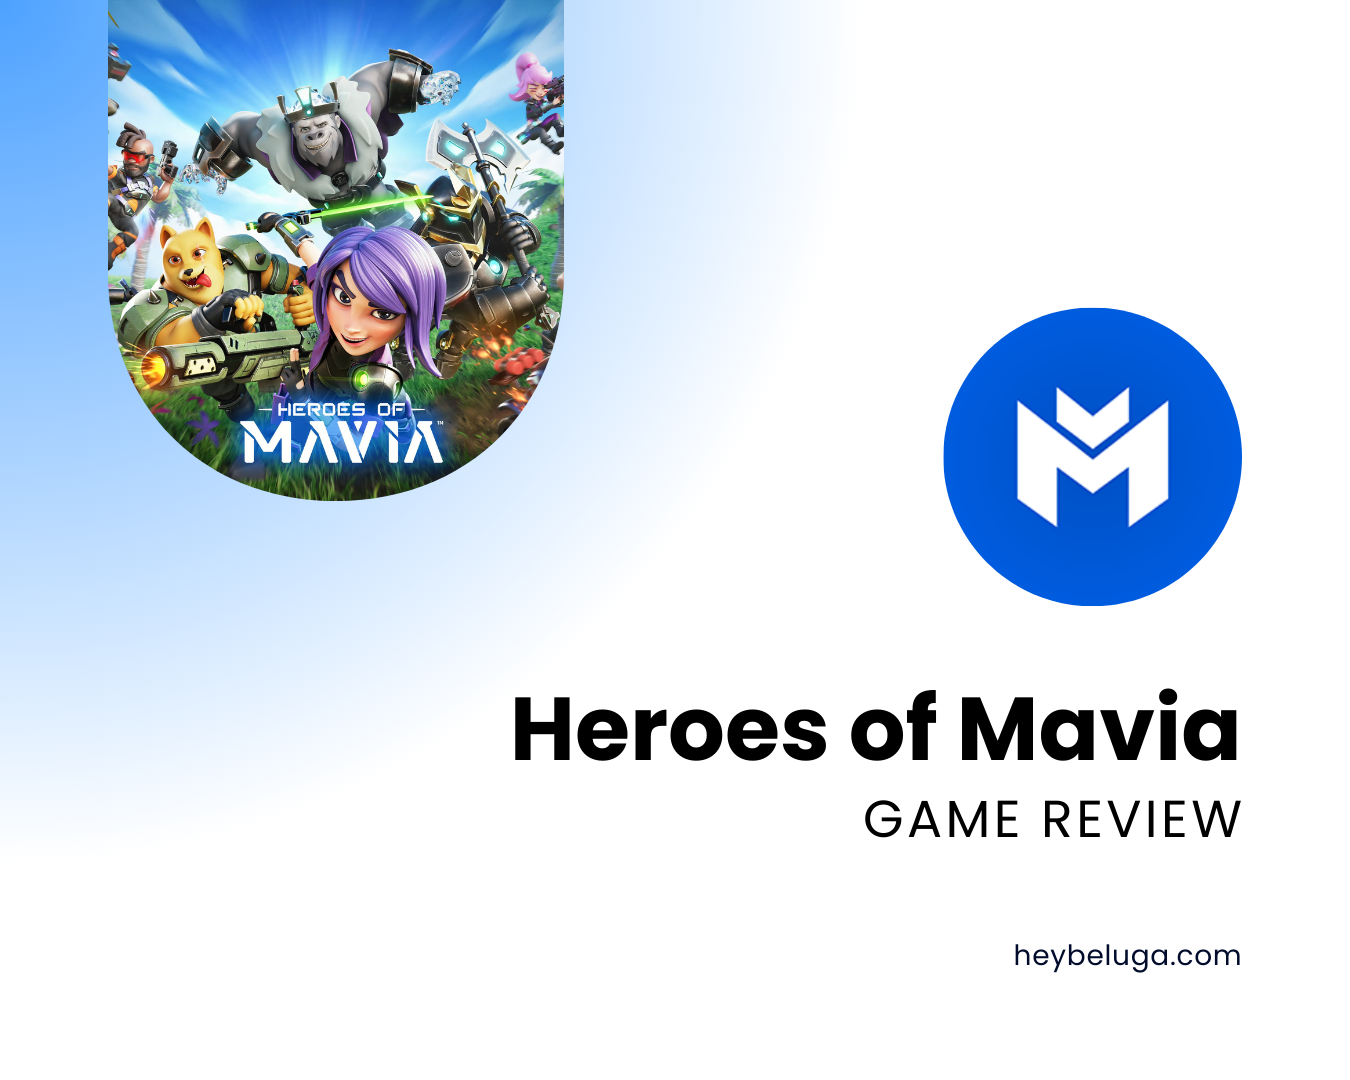 Image for Heroes of Mavia Game Review